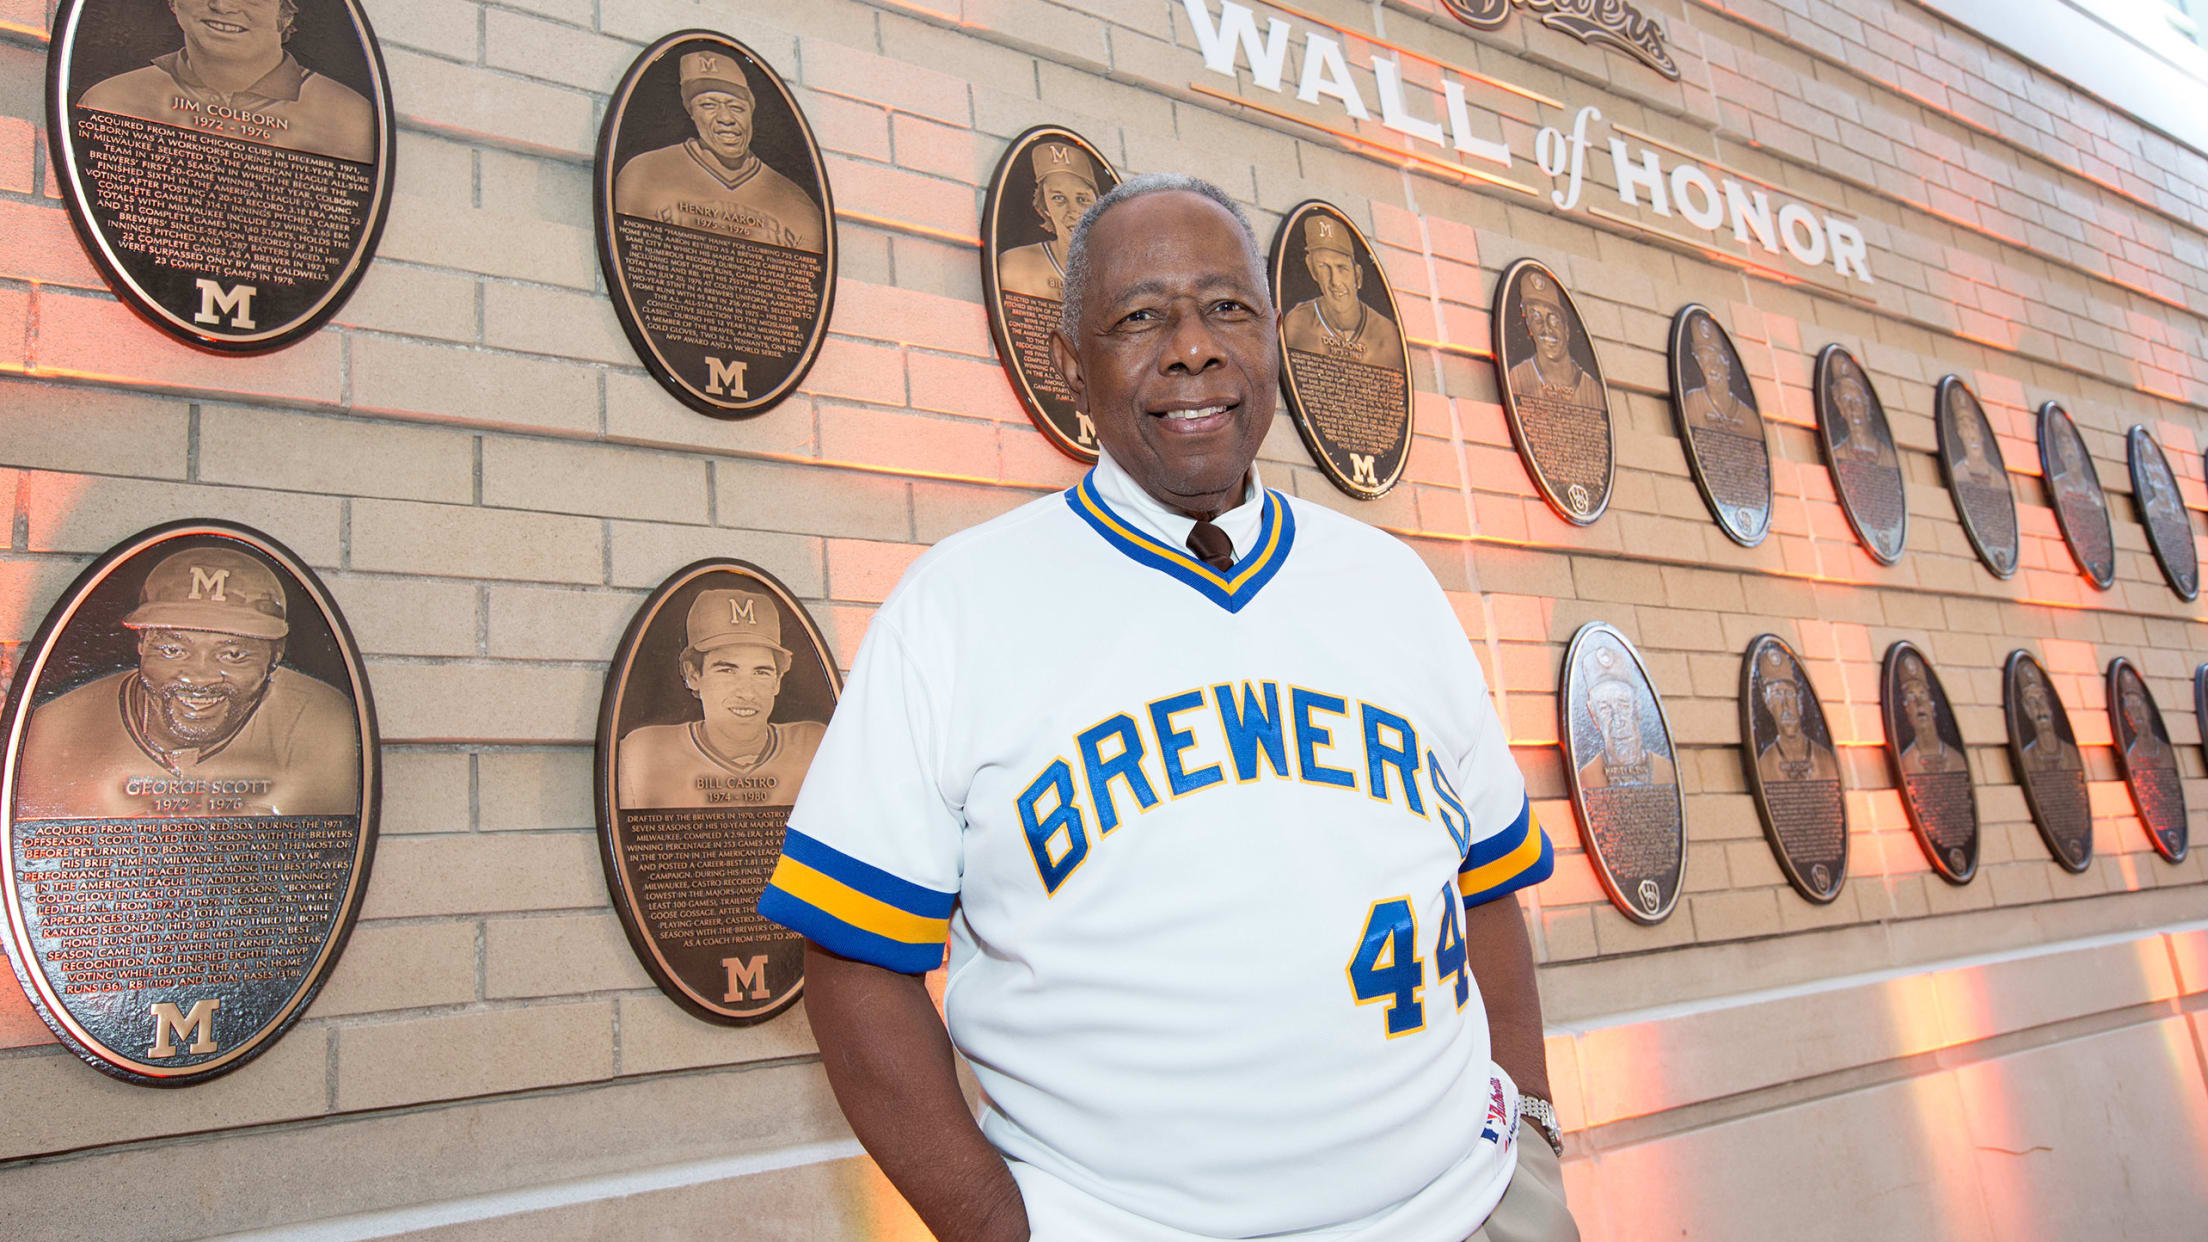 Prince Fielder's place in Brewers history - Brew Crew Ball